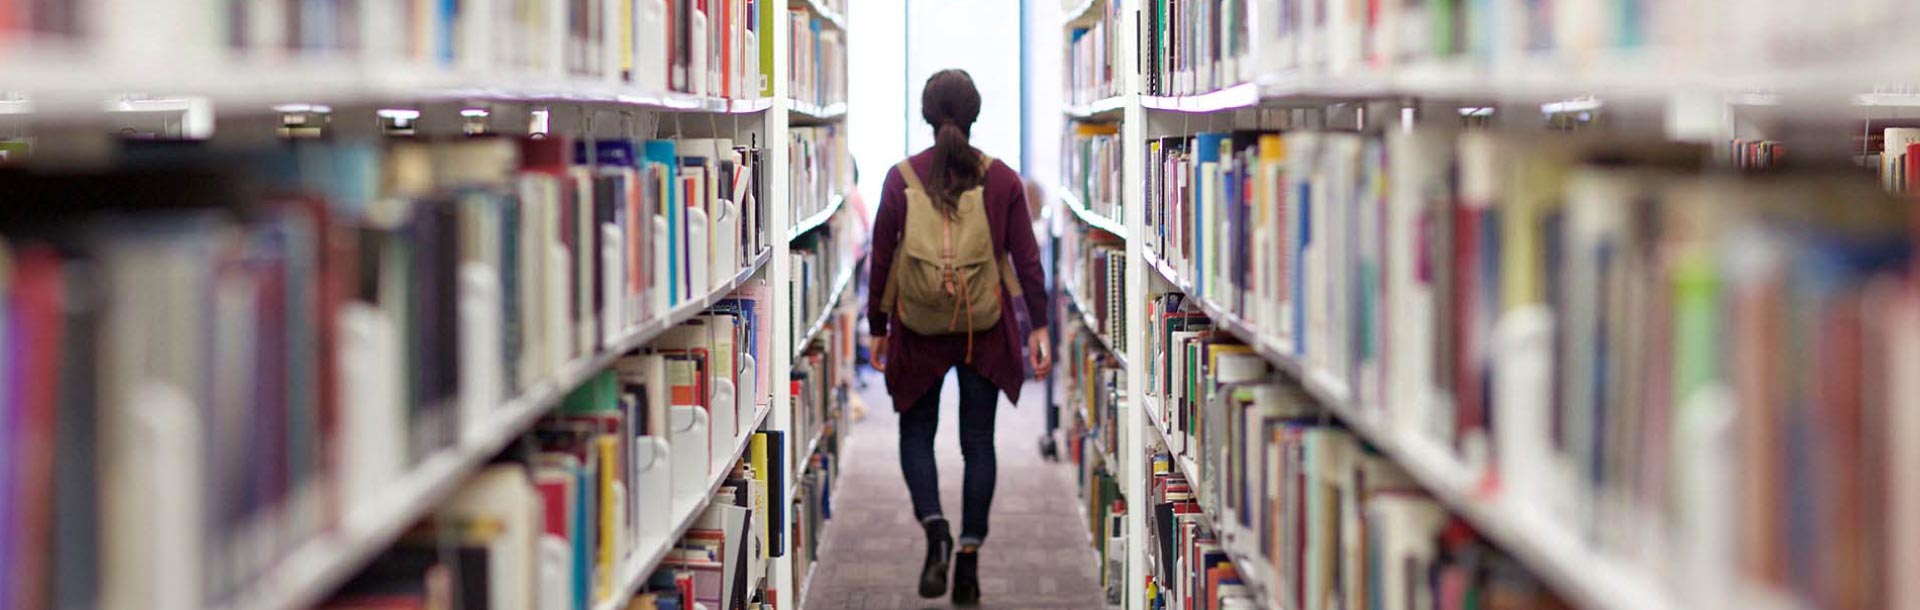 Student walking through Library